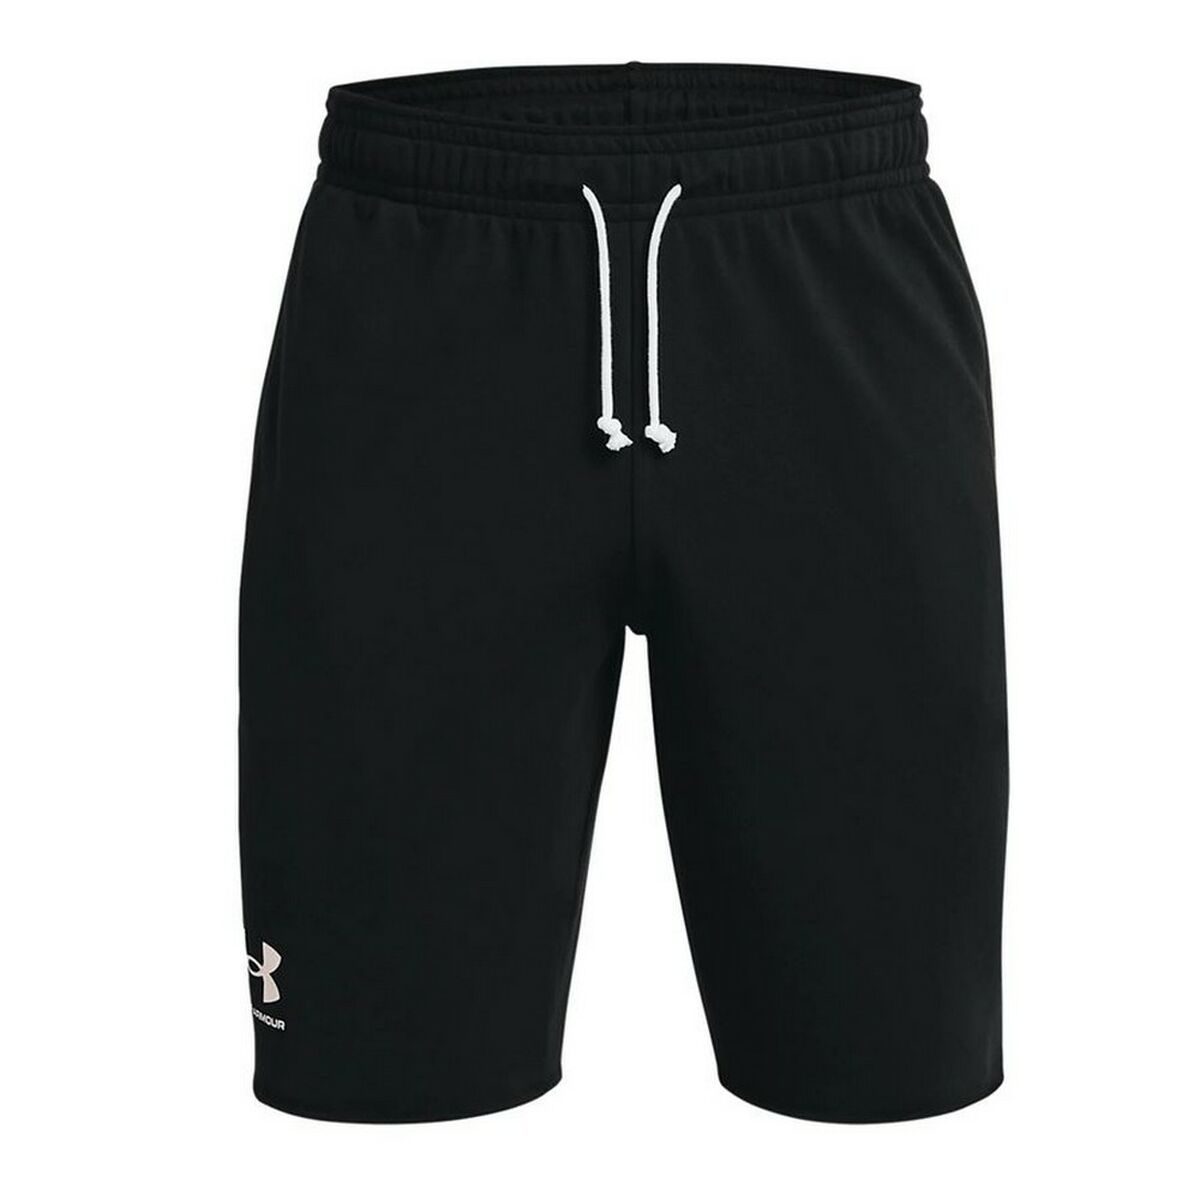 Men's Sports Shorts Under Armour Rival Terry Black XL